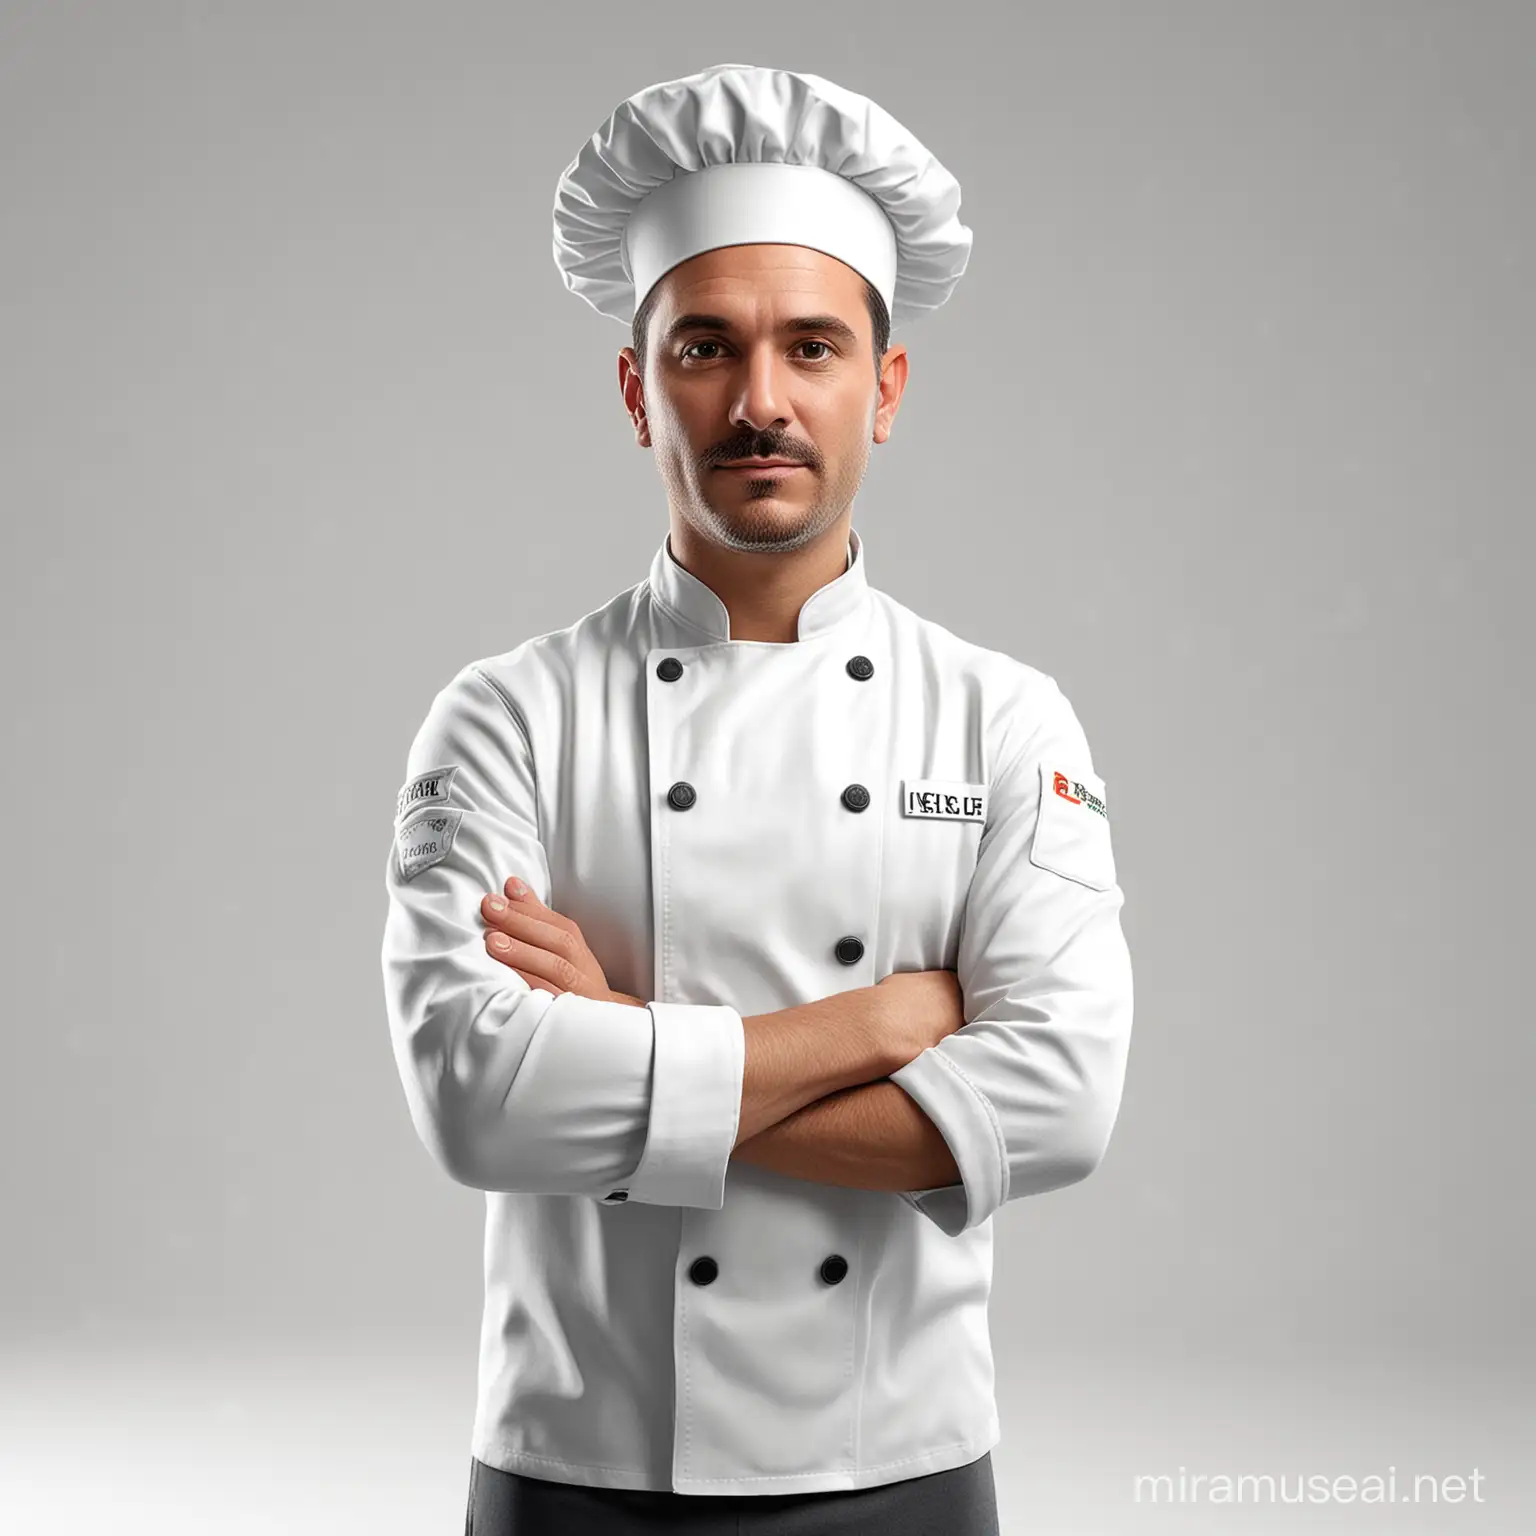 Professional Chef Portrait in 3D on White Background